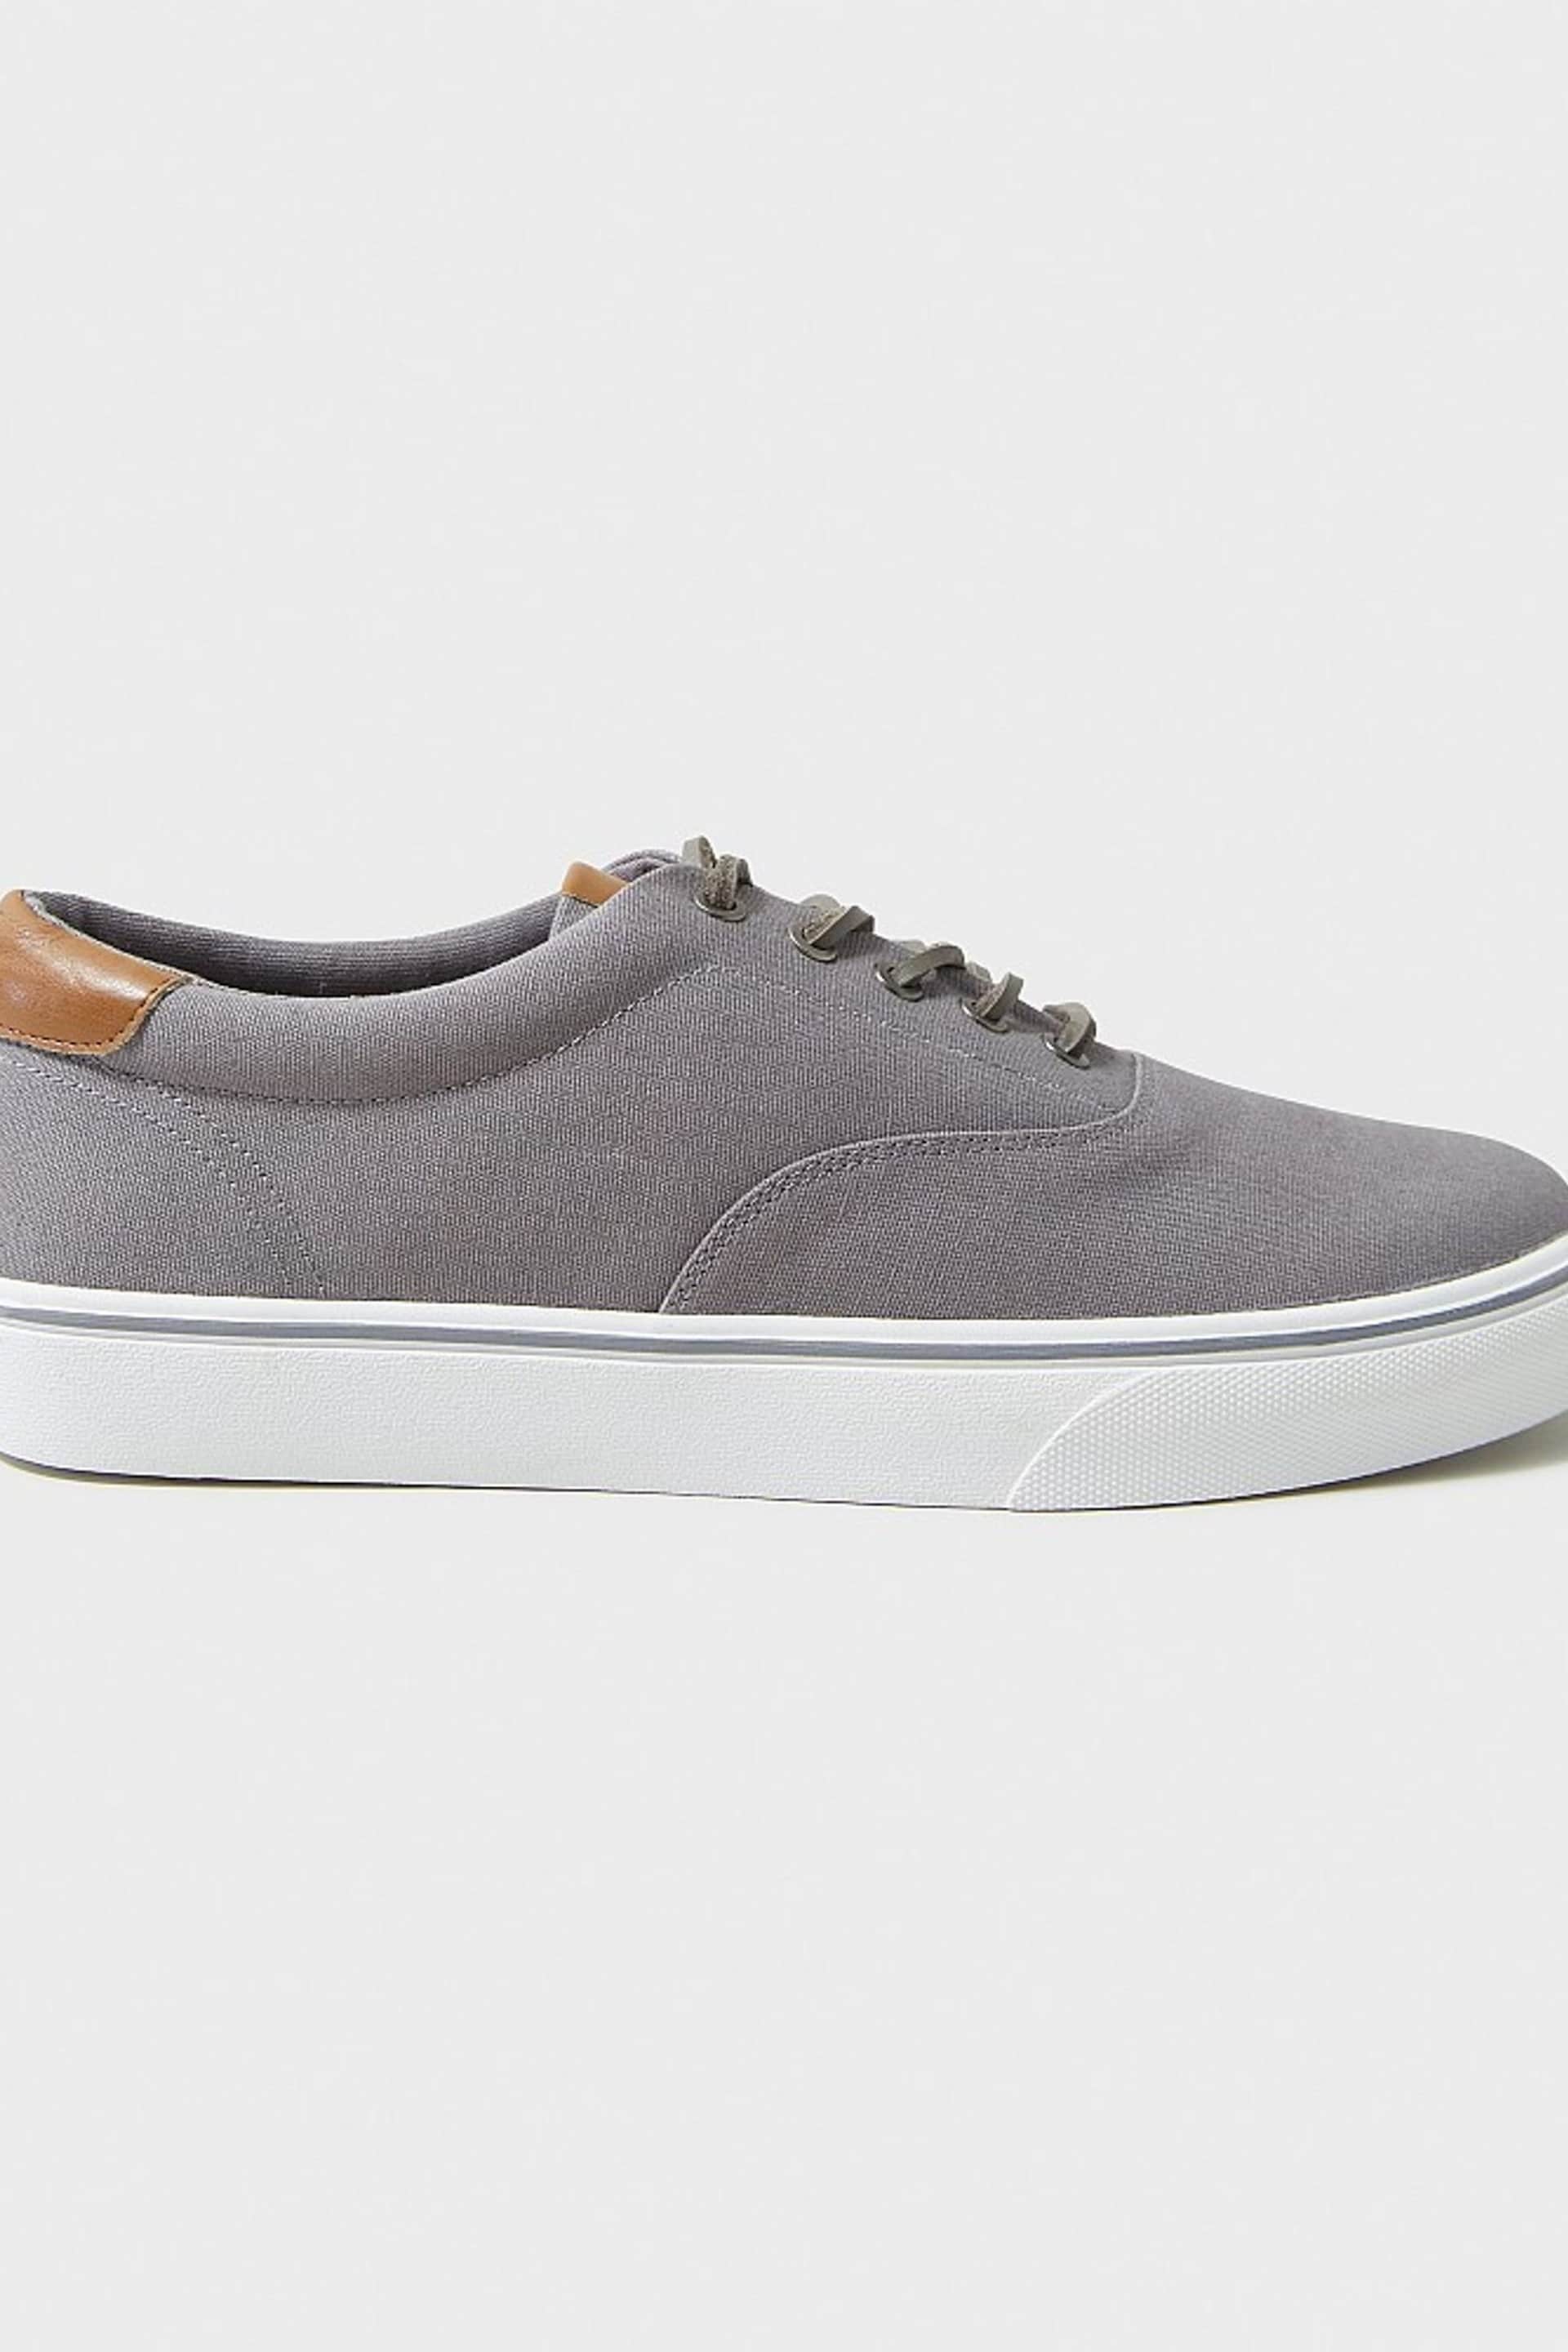 Crew Clothing Oxford Canvas Trainers - Image 2 of 5